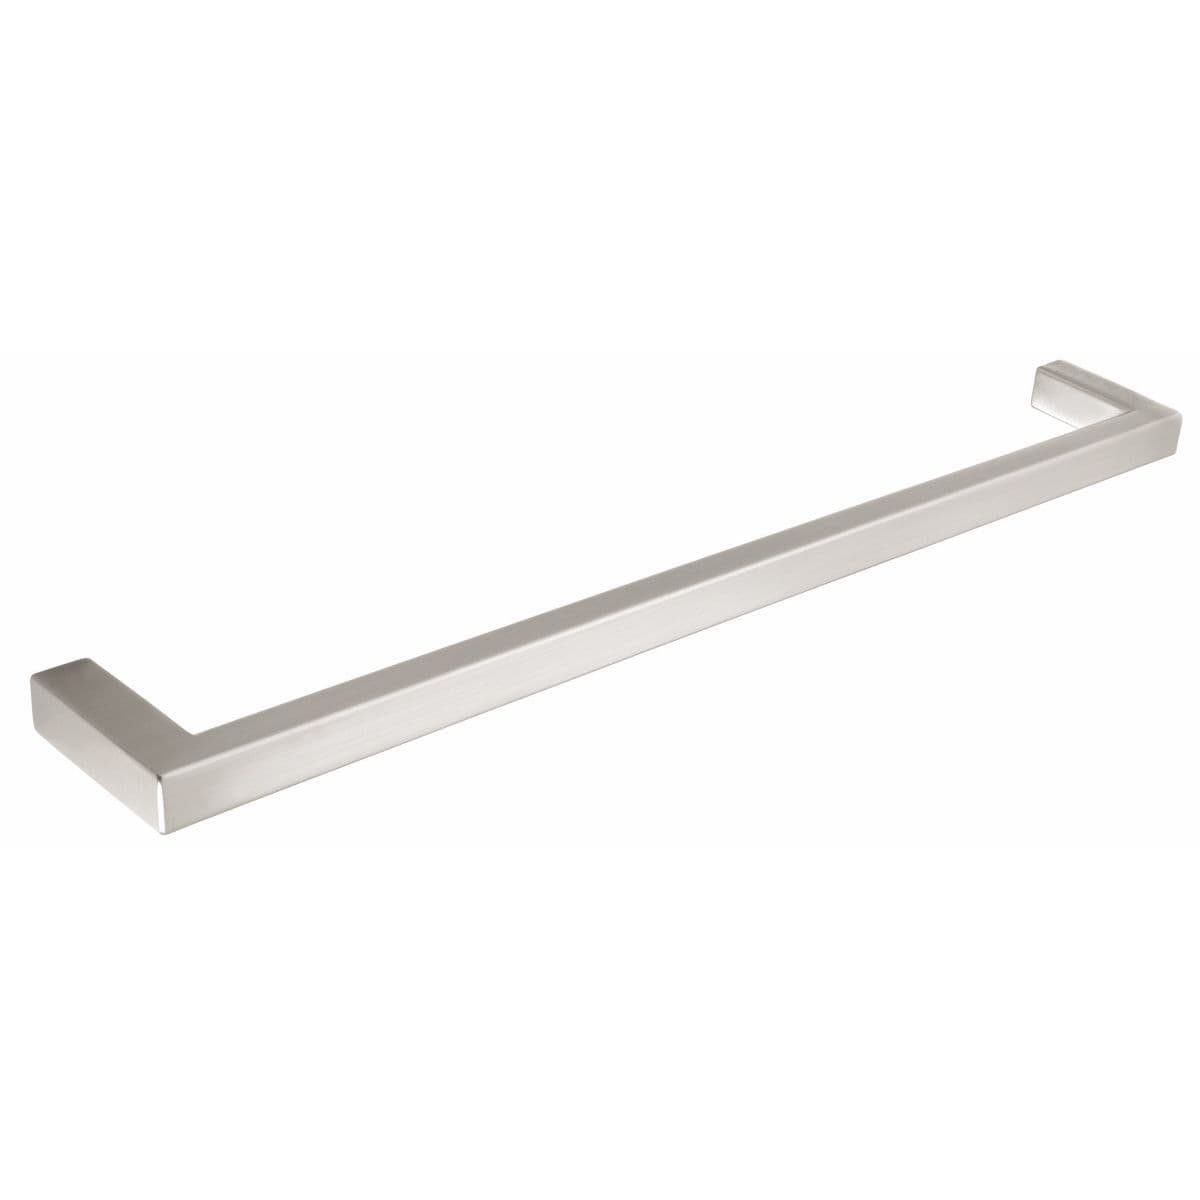 SONNING (YARD) BAR Cupboard Handle - 4 sizes - BRUSHED S/STEEL EFFECT finish (PWS H745 / H746 / H747 / H748)